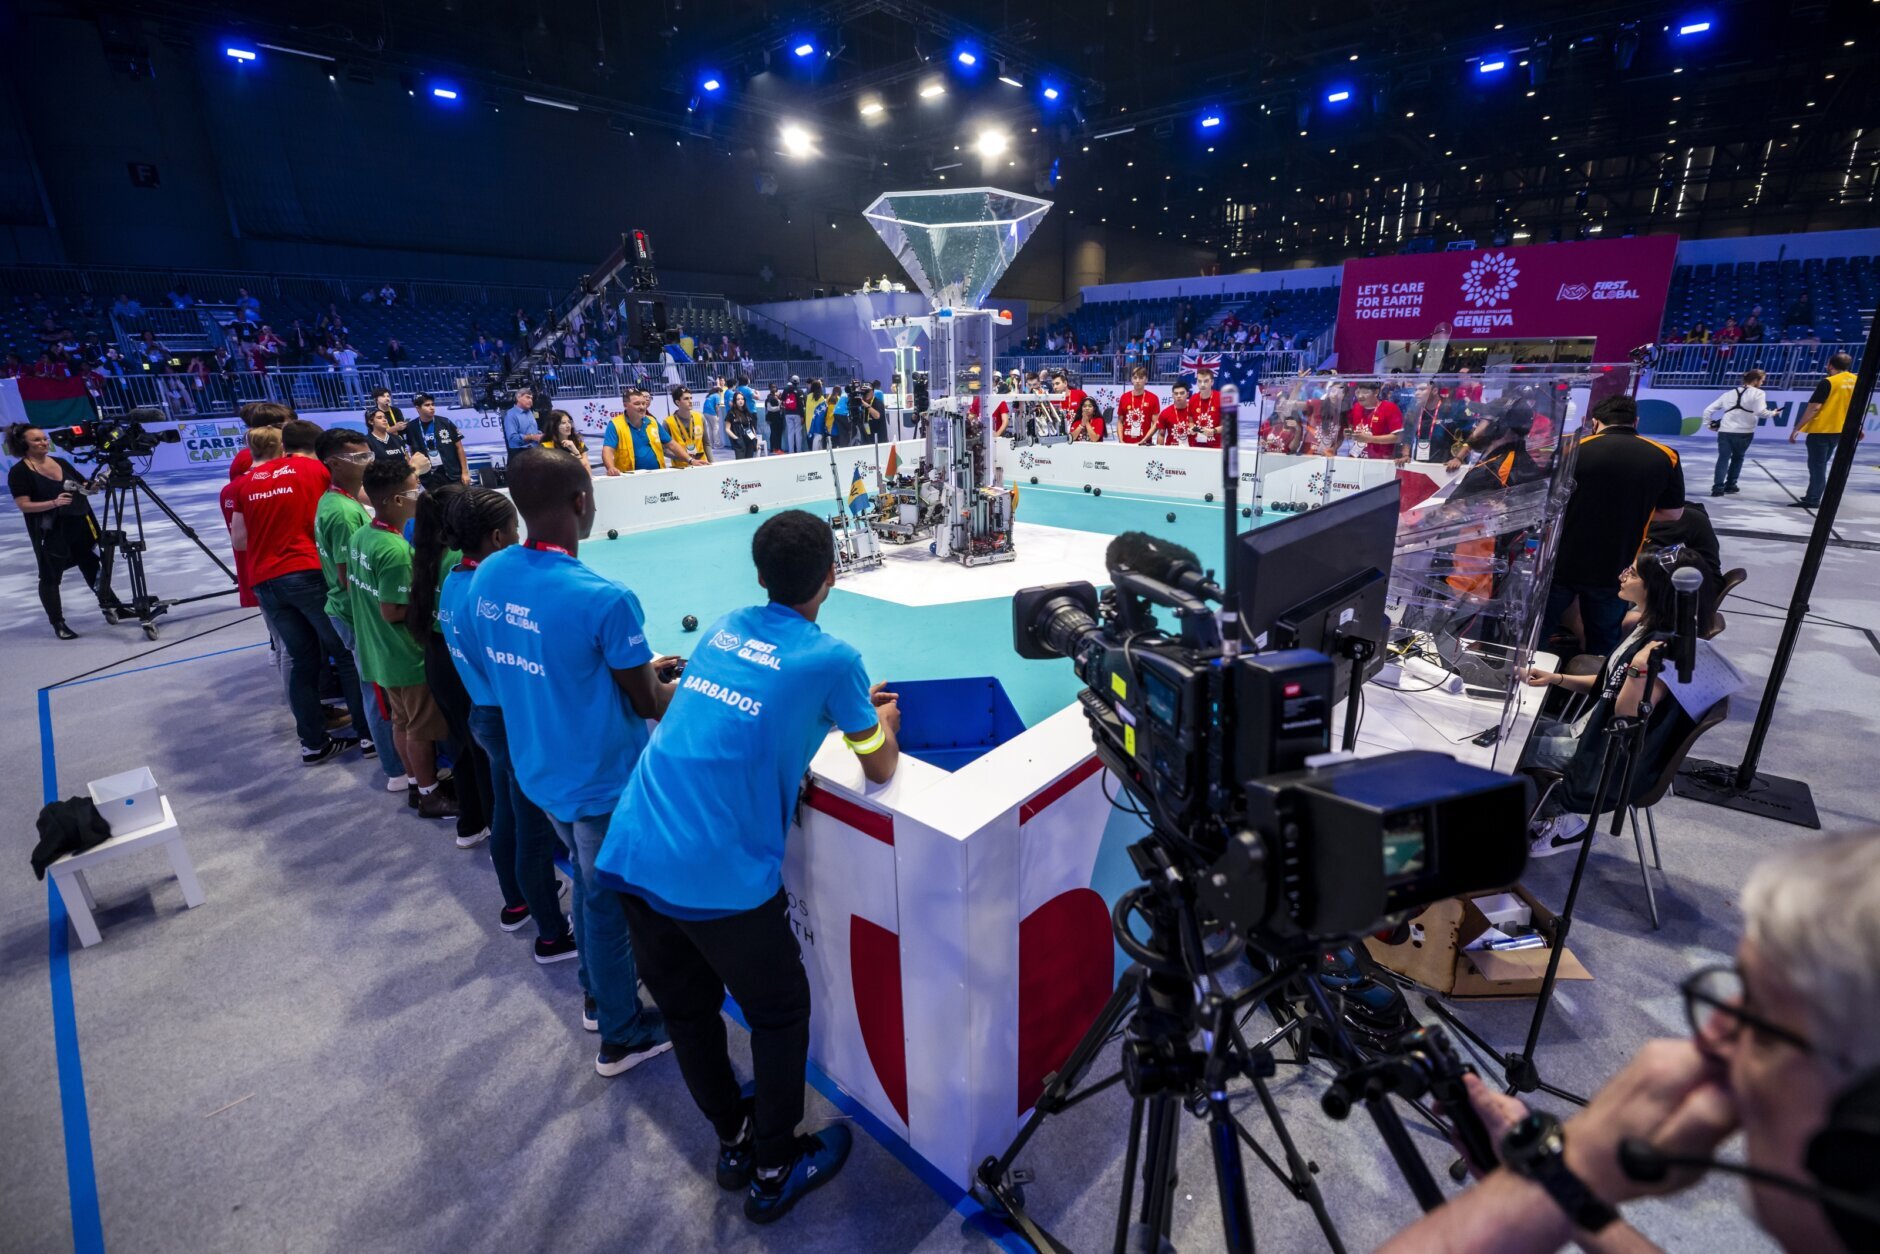 Robots from different teams compete during the 6th edition of the First Global Robotics Challenge in Geneva, Switzerland, Saturday, Oct. 15, 2022. (Martial Trezzini/Keystone via AP)